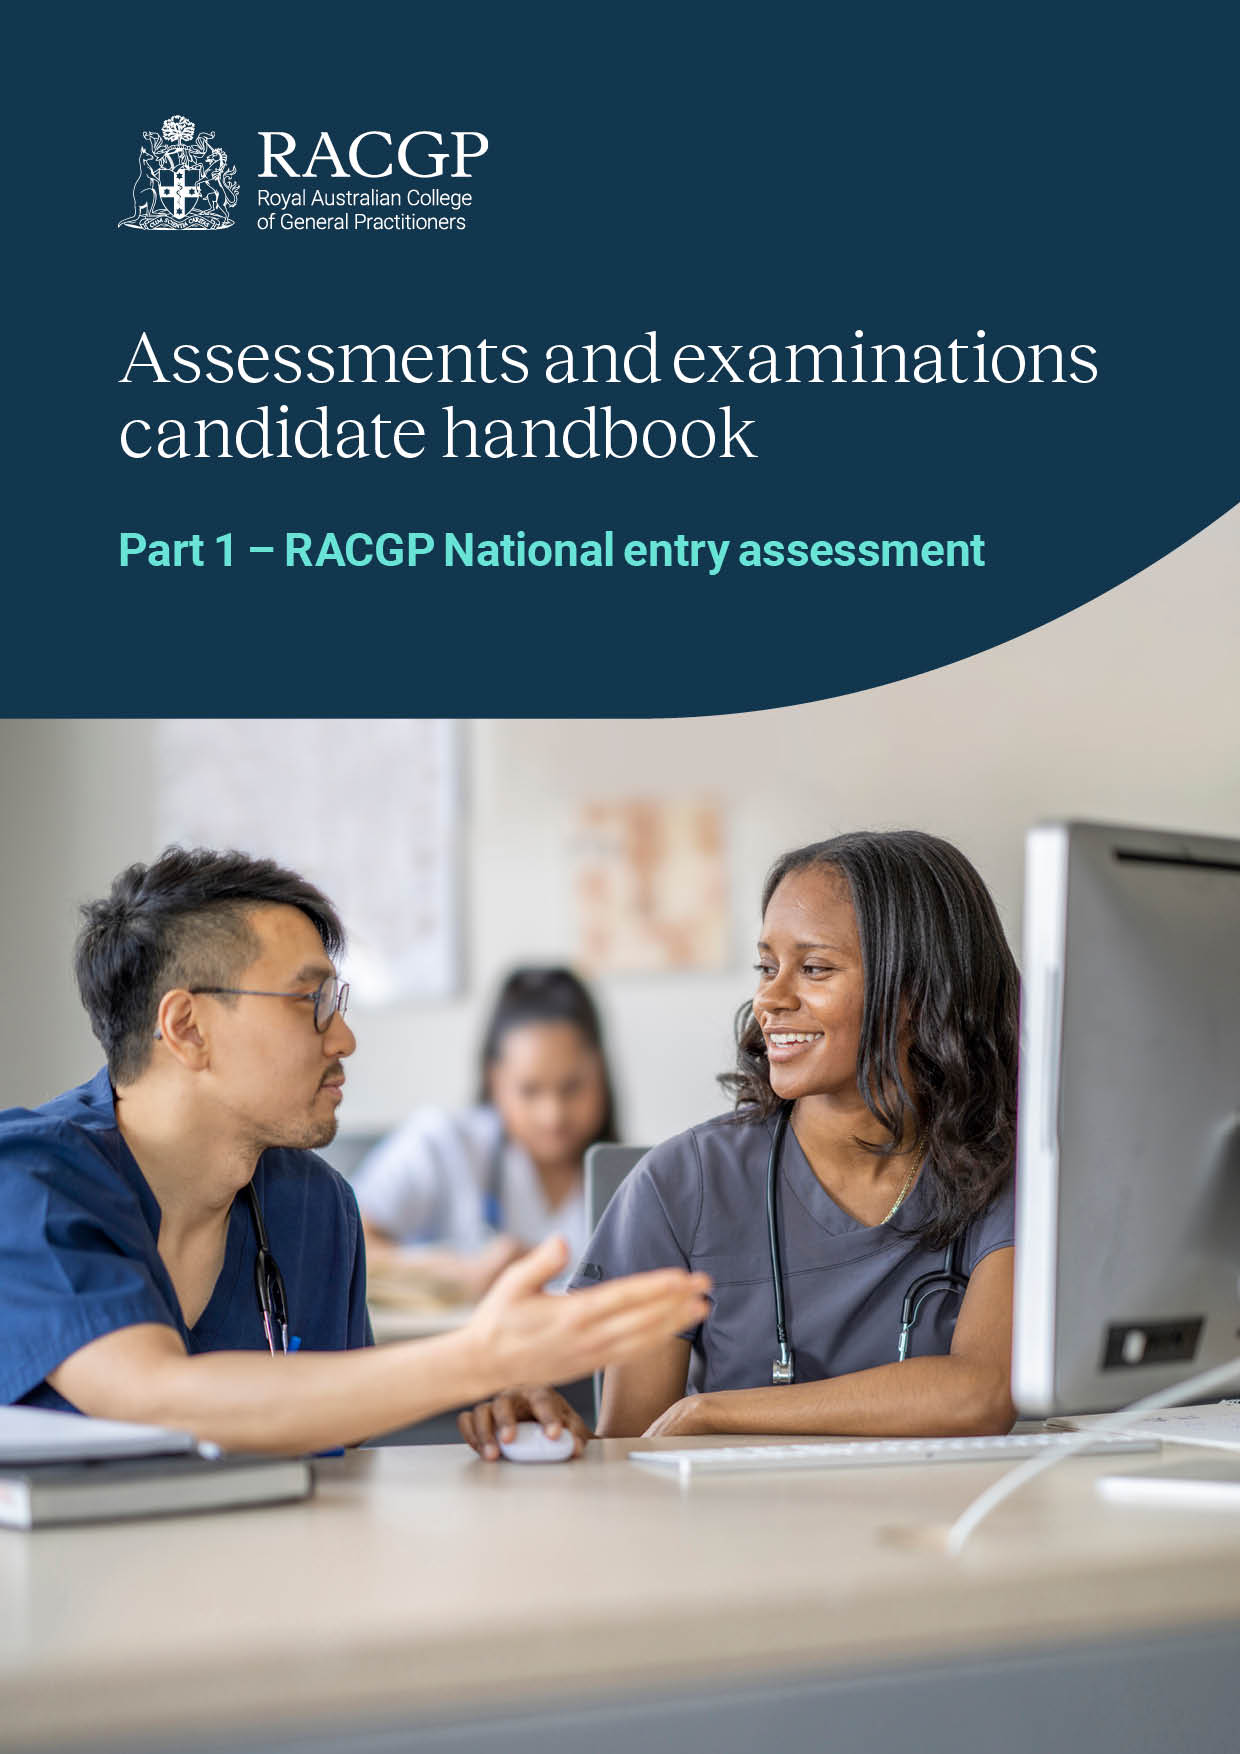 Part 1: RACGP National entry assessment